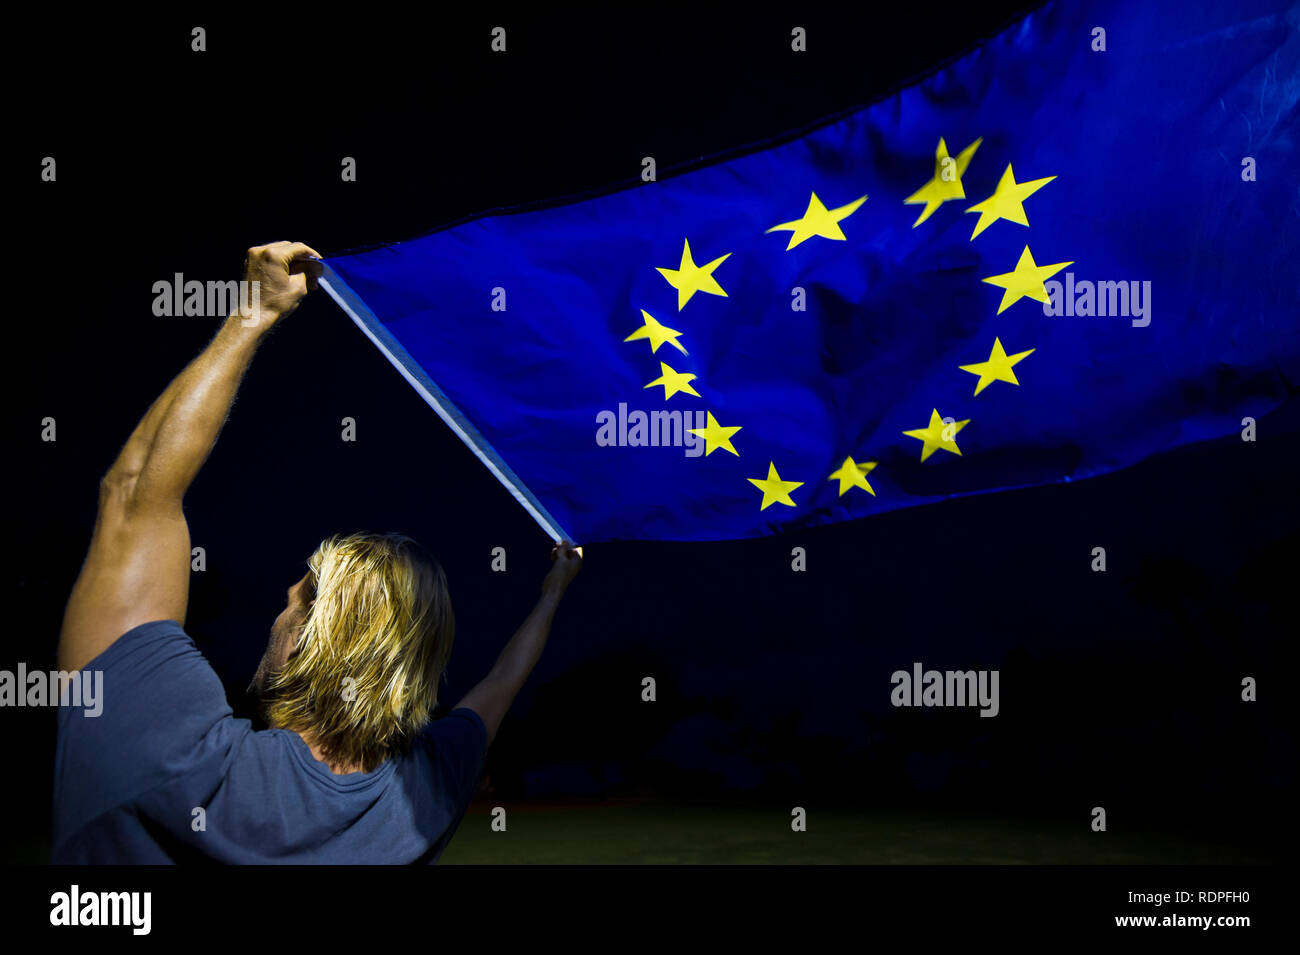 Man with blond hair holding a European Union flag waving against black night sky Stock Photo